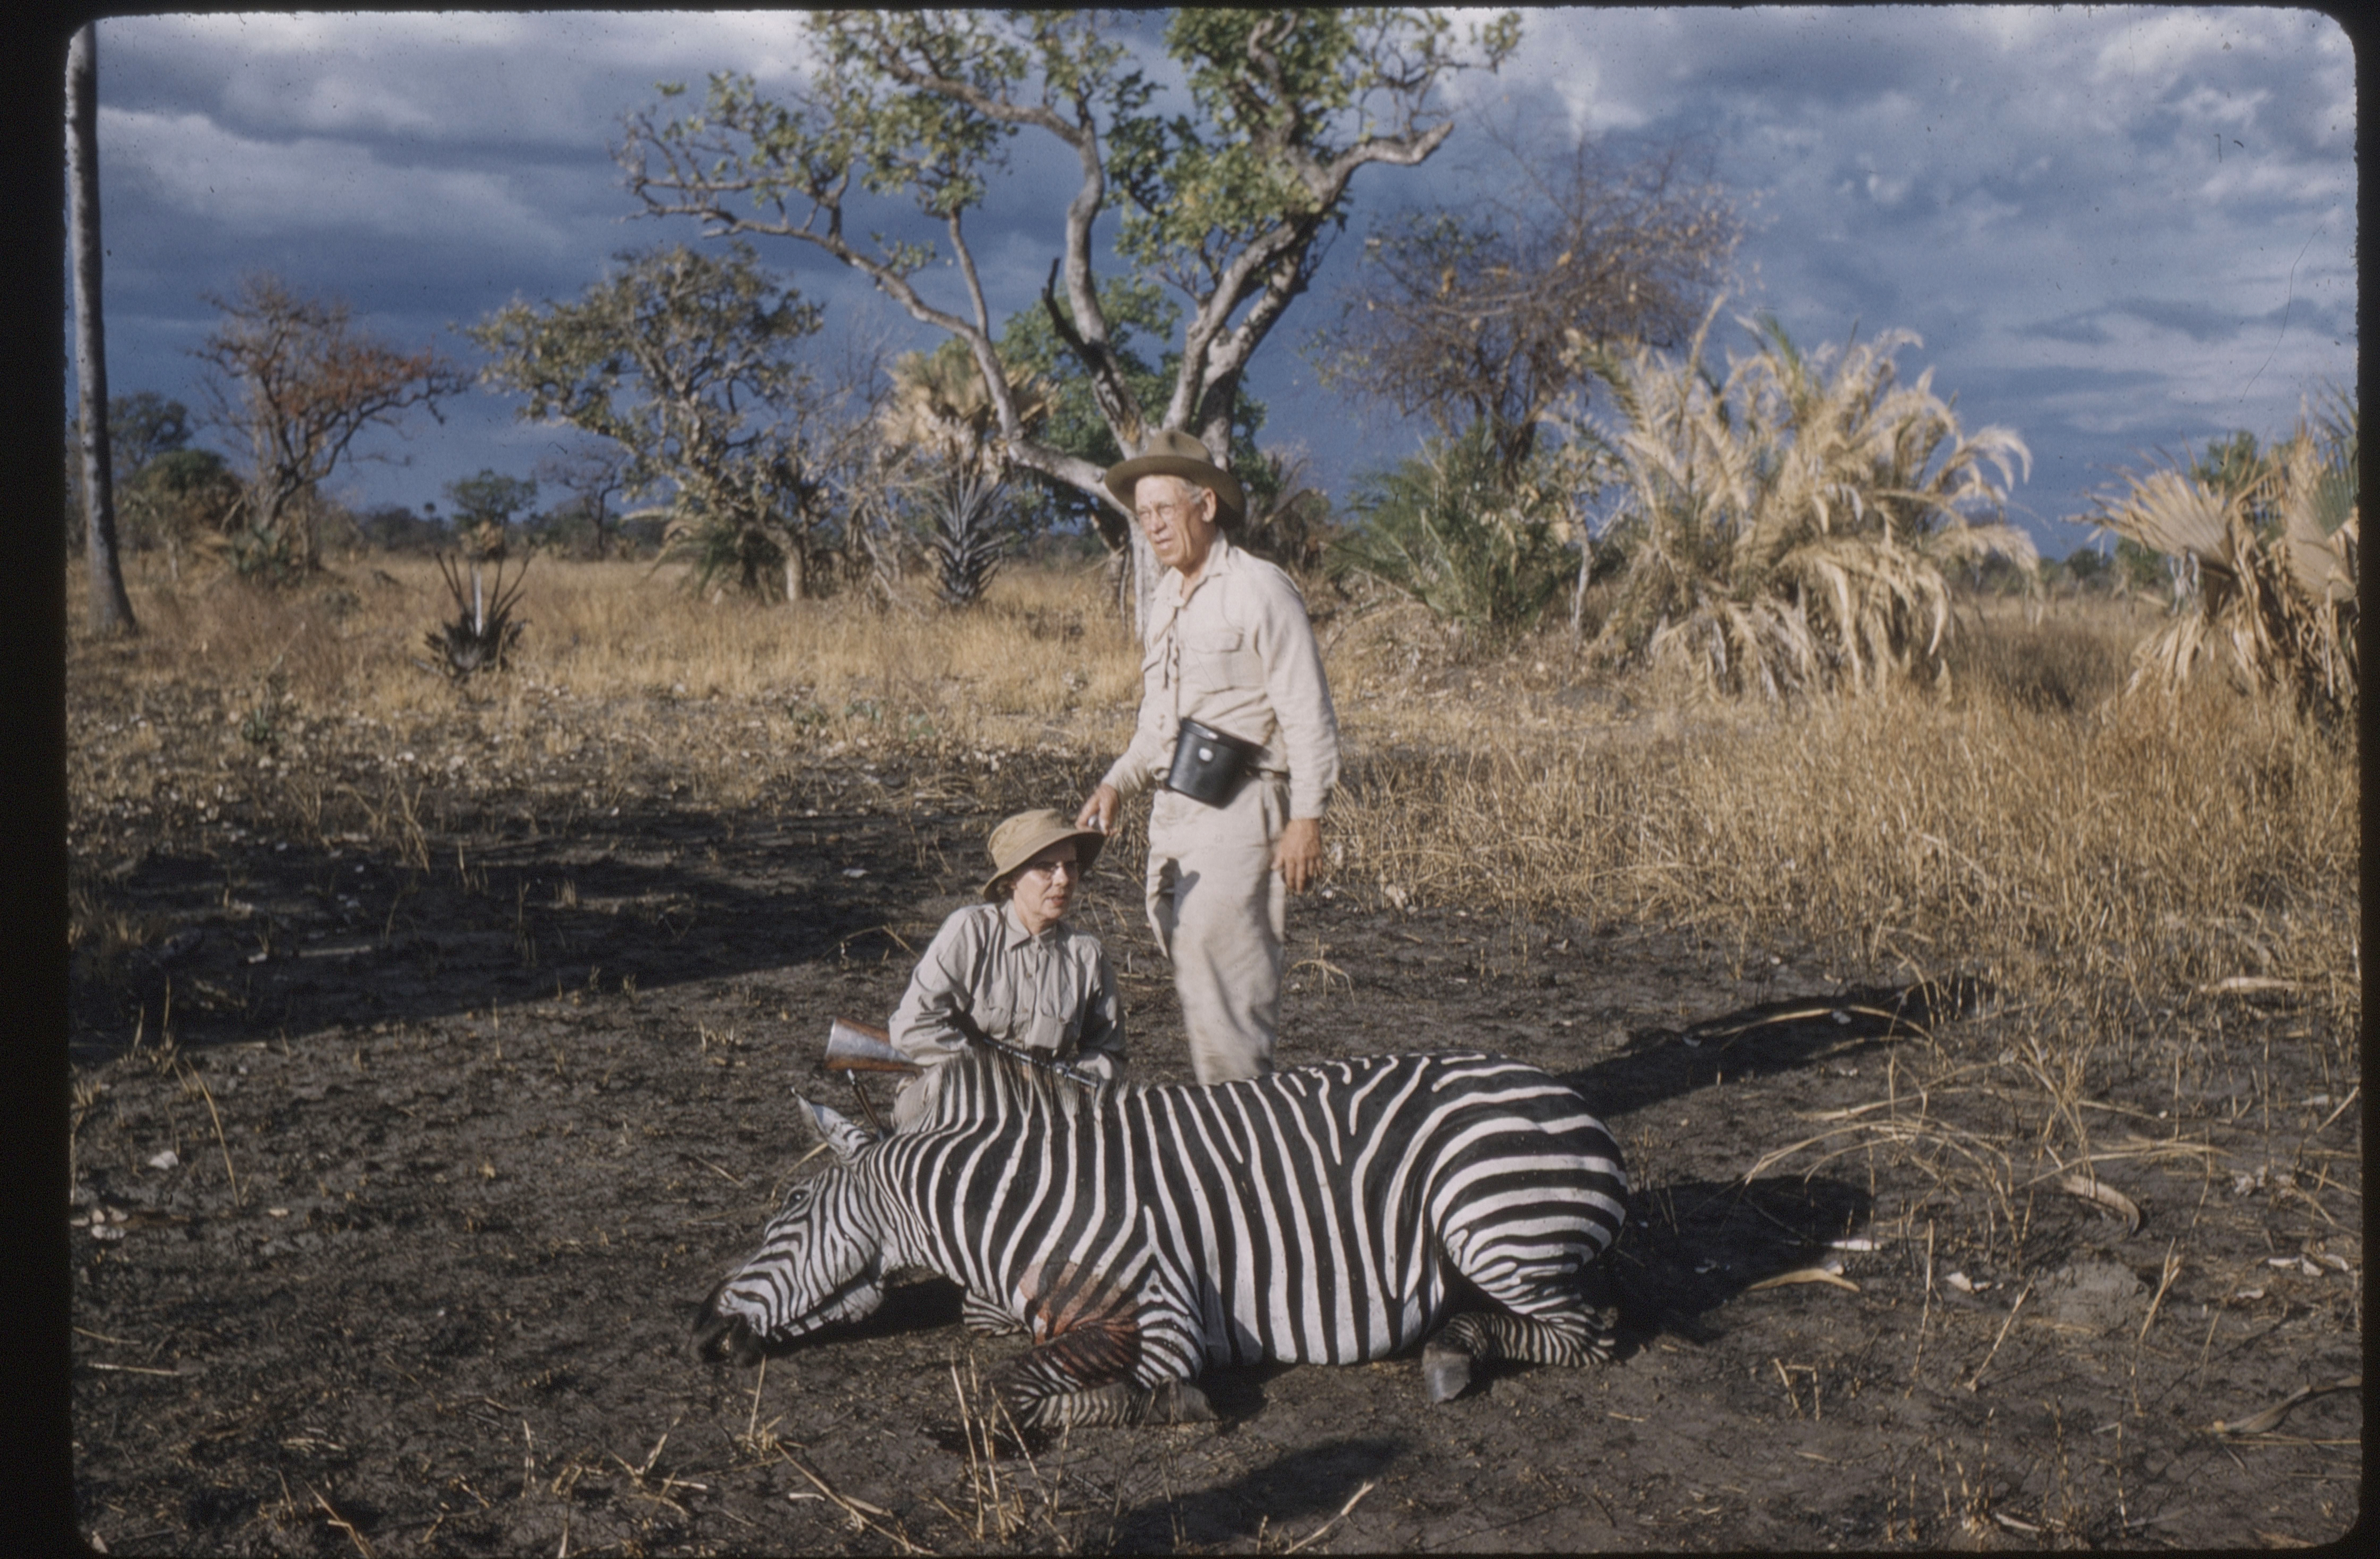 Jack and Eleanor O'Connor with a zebra.